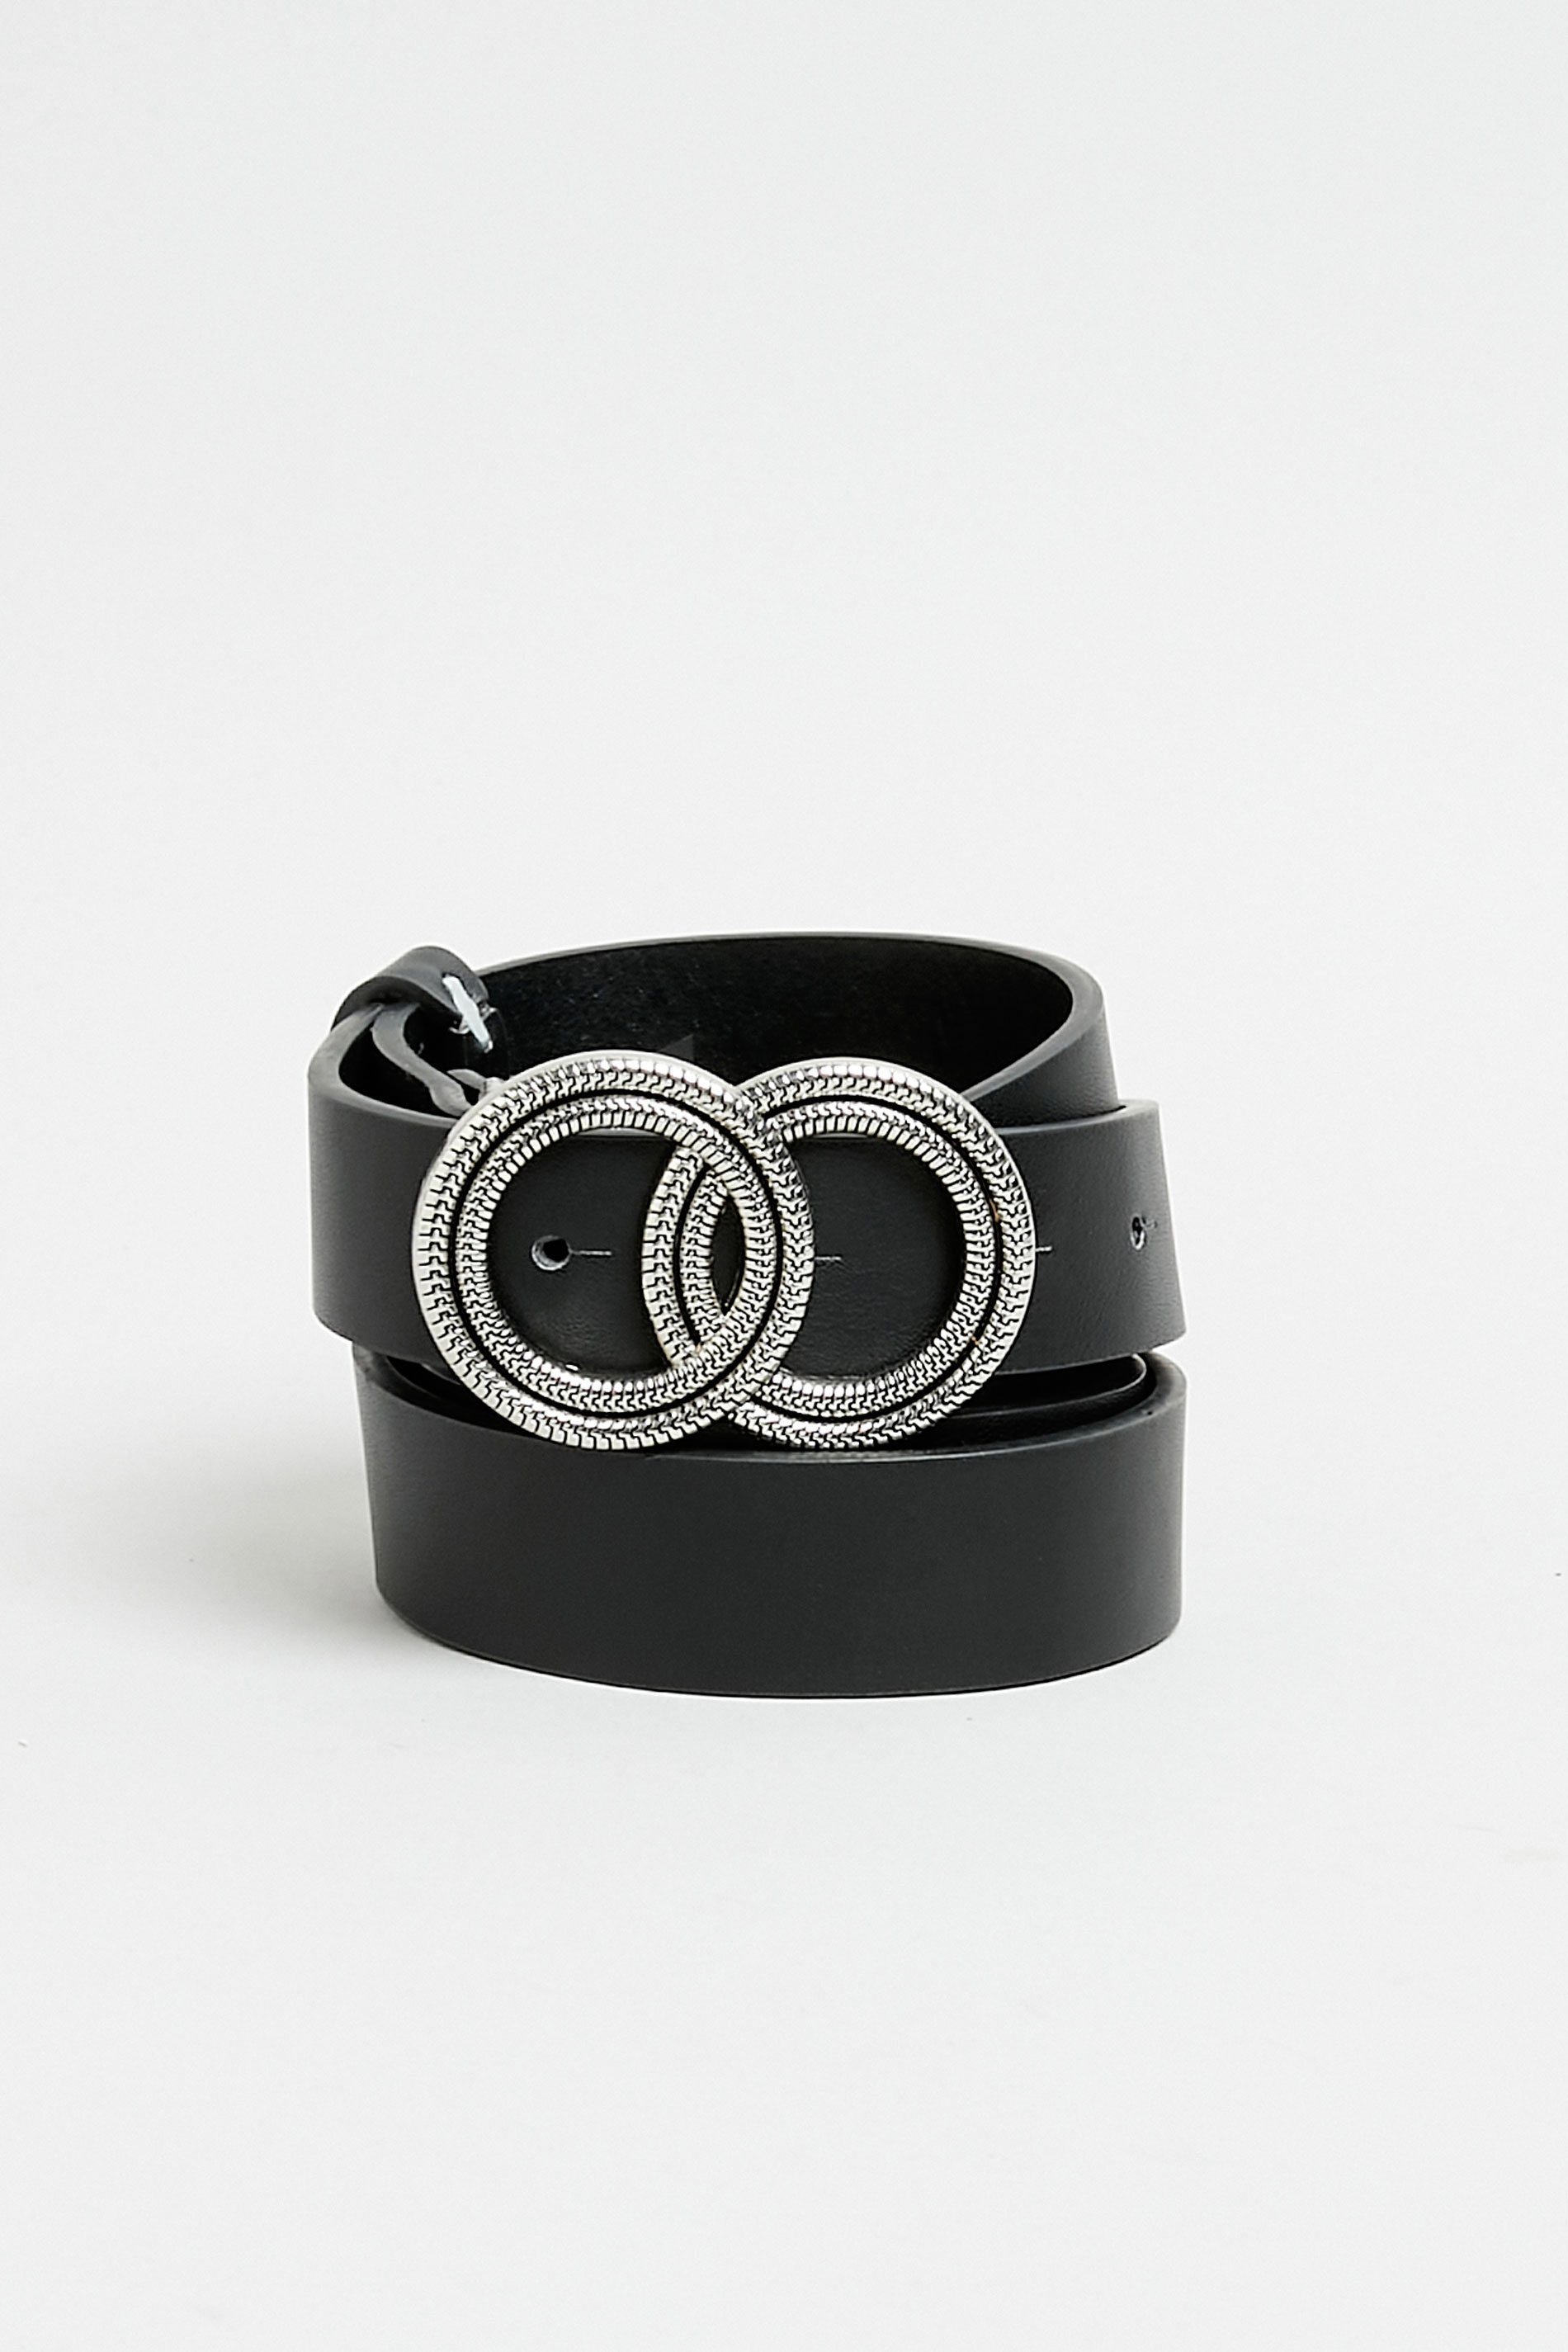 Plus Size Black Double Ring Buckle Belt | Yours Clothing  2